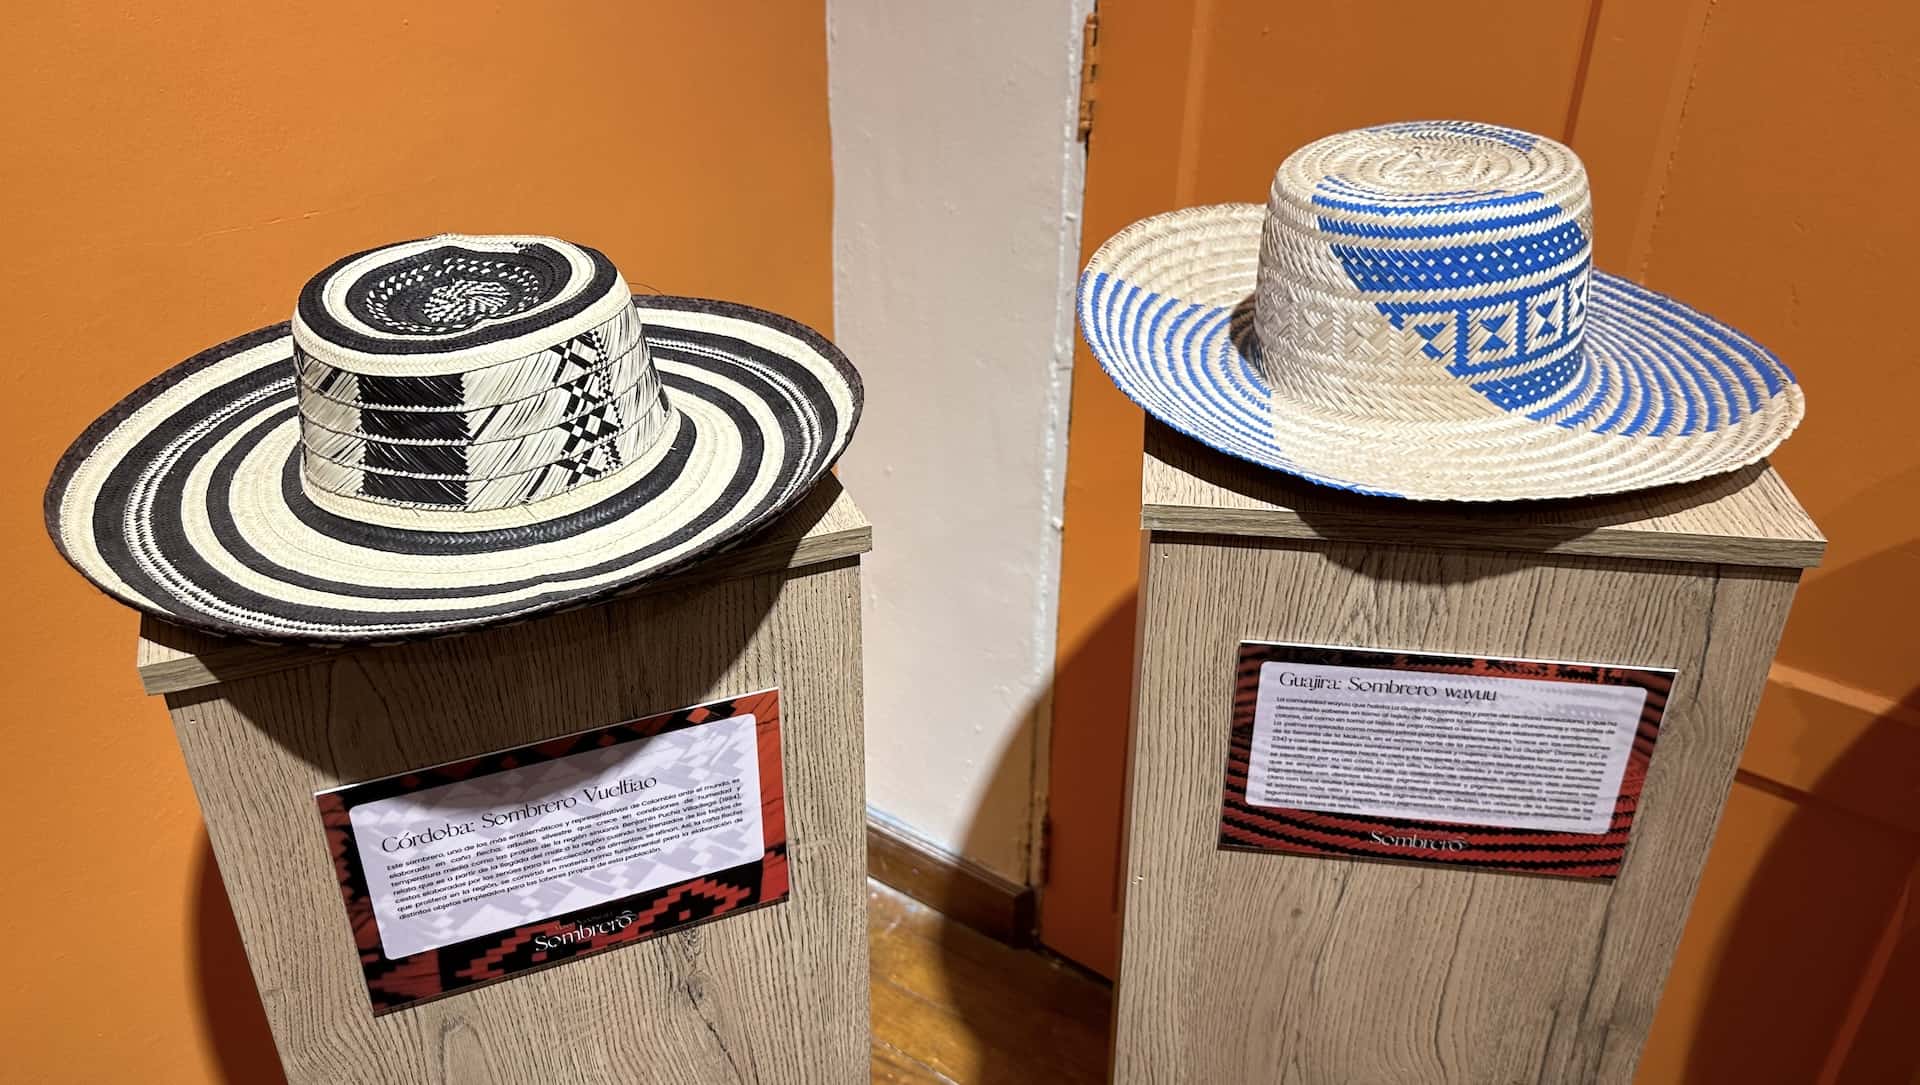 Sombrero vueltiao (left) and sombrero wayuu (right) at the National Museum of Hats at the Francisco Giraldo Cultural Center in Aguadas, Caldas, Colombia